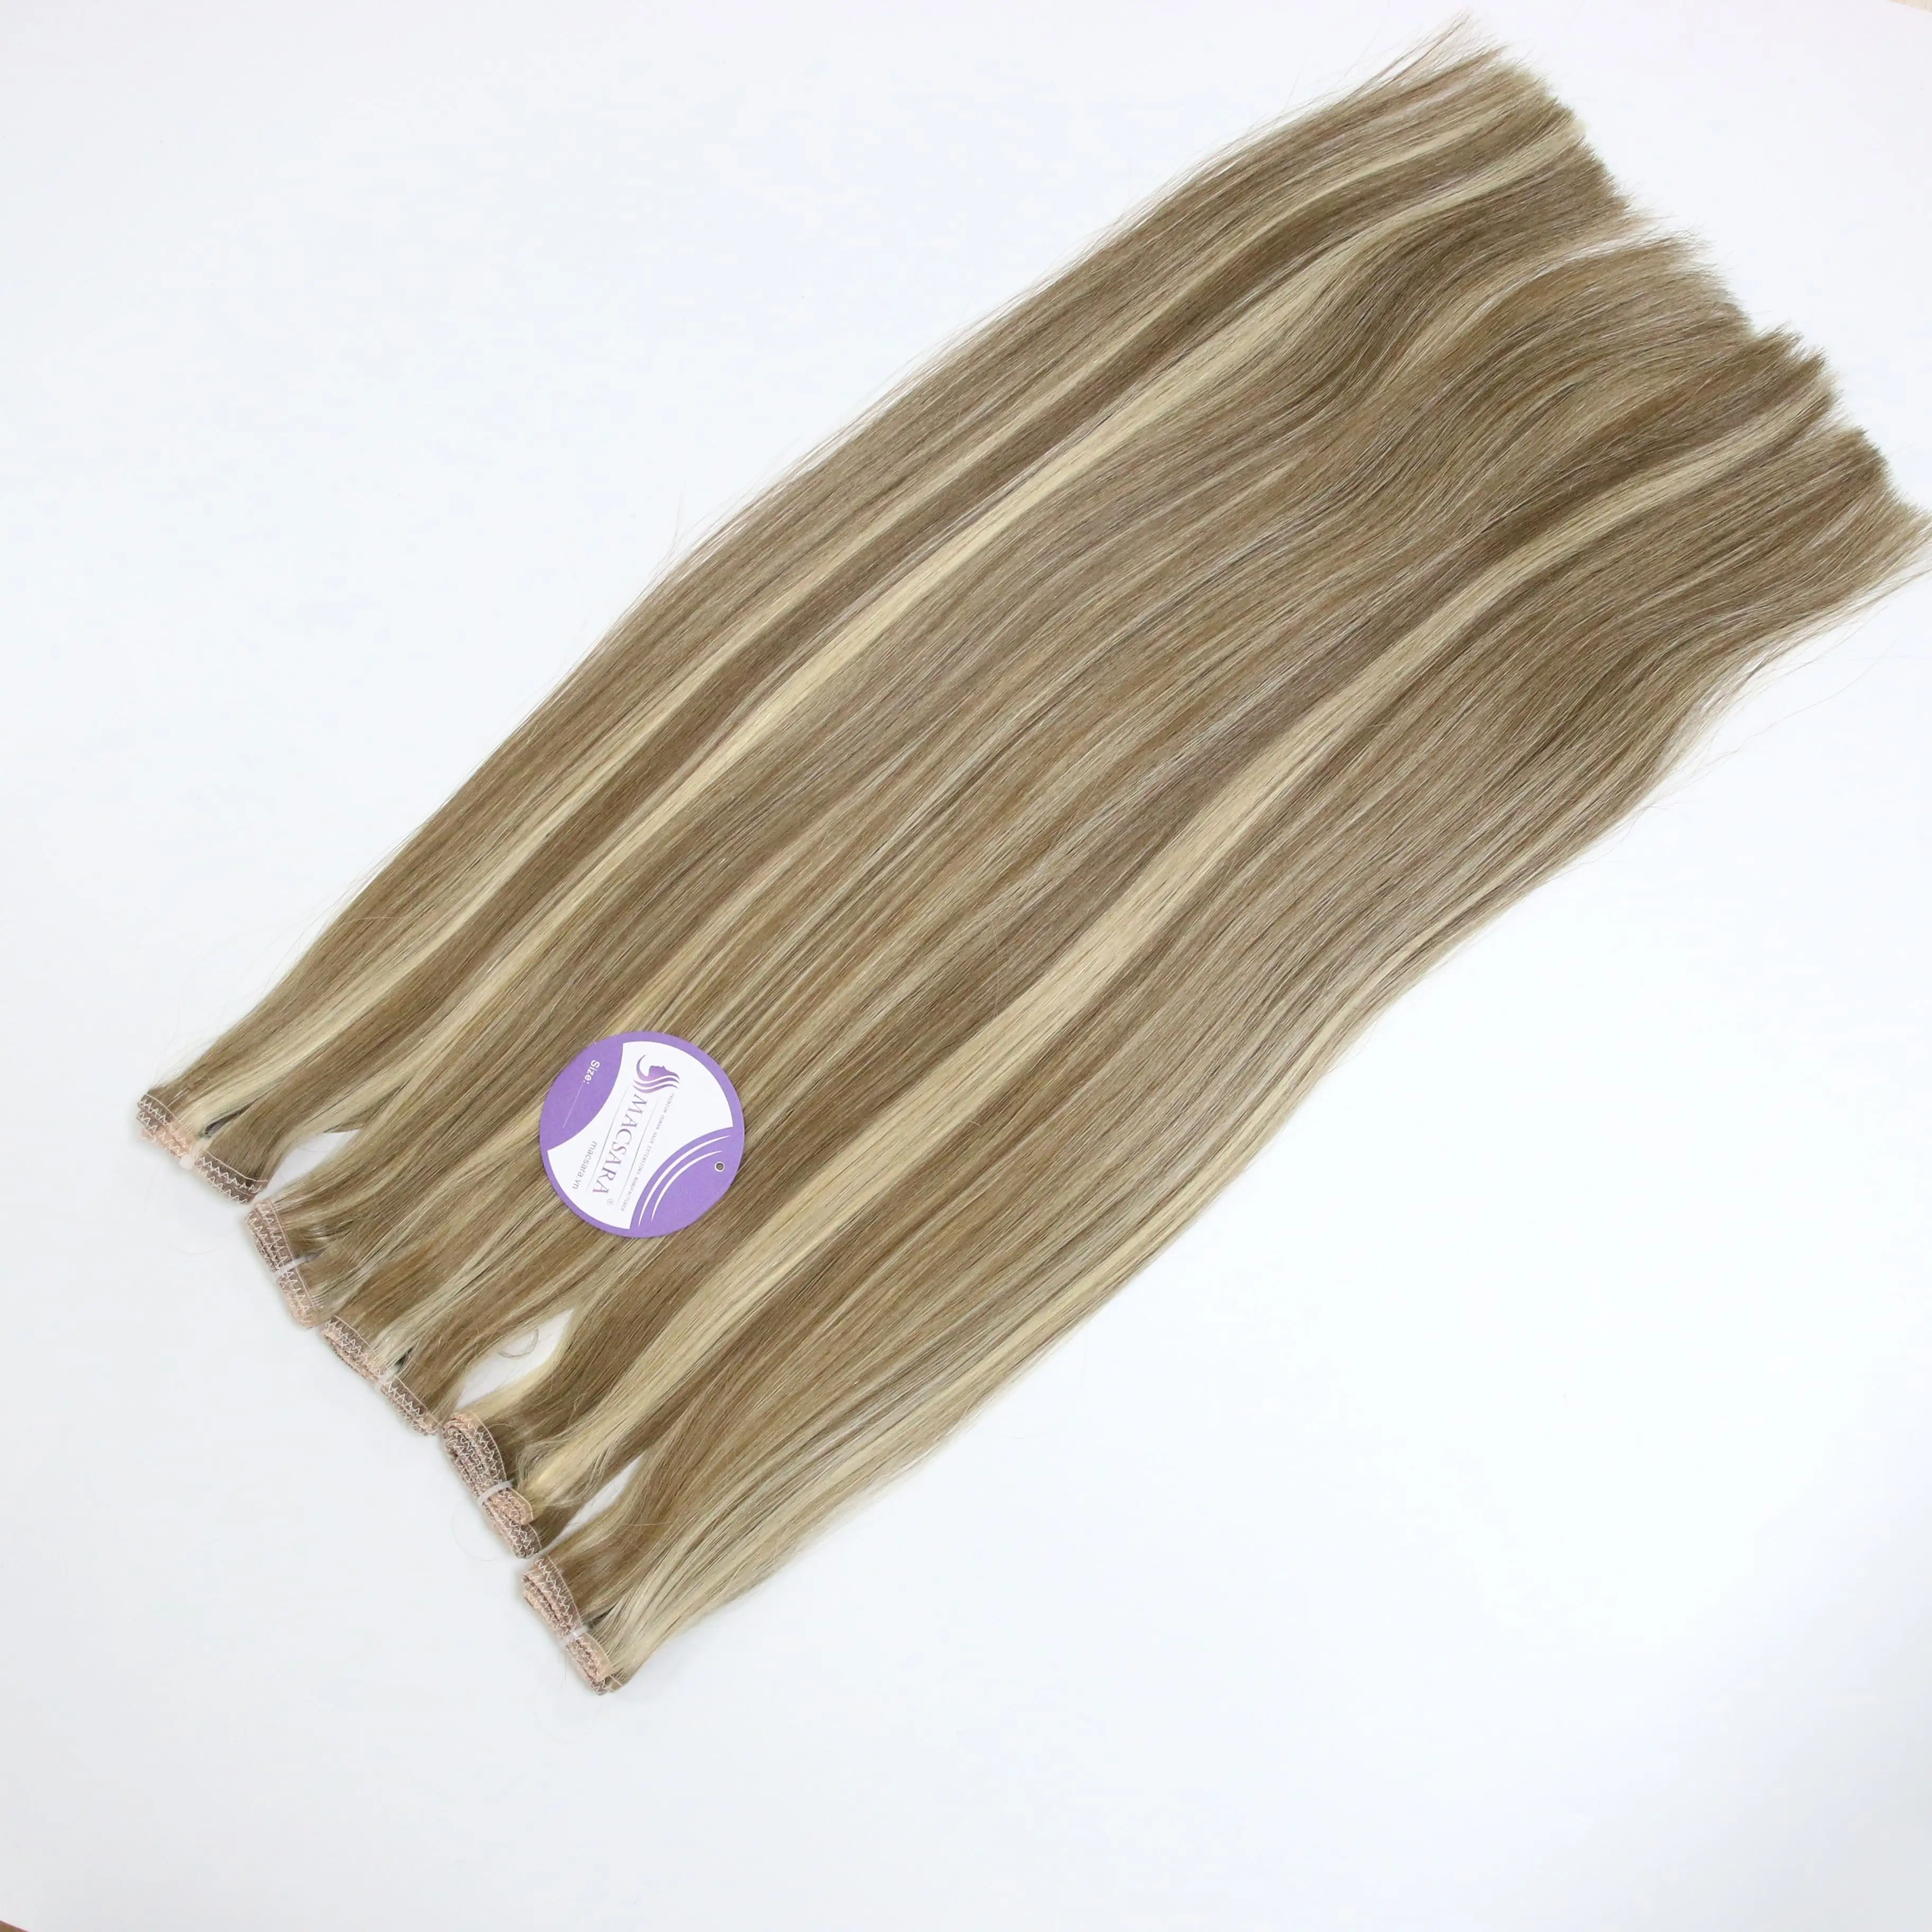 Vietnamese human Best Hair Extension Blonde Color Hair Cheapest Price Fast Shipping cuticle aligned hair